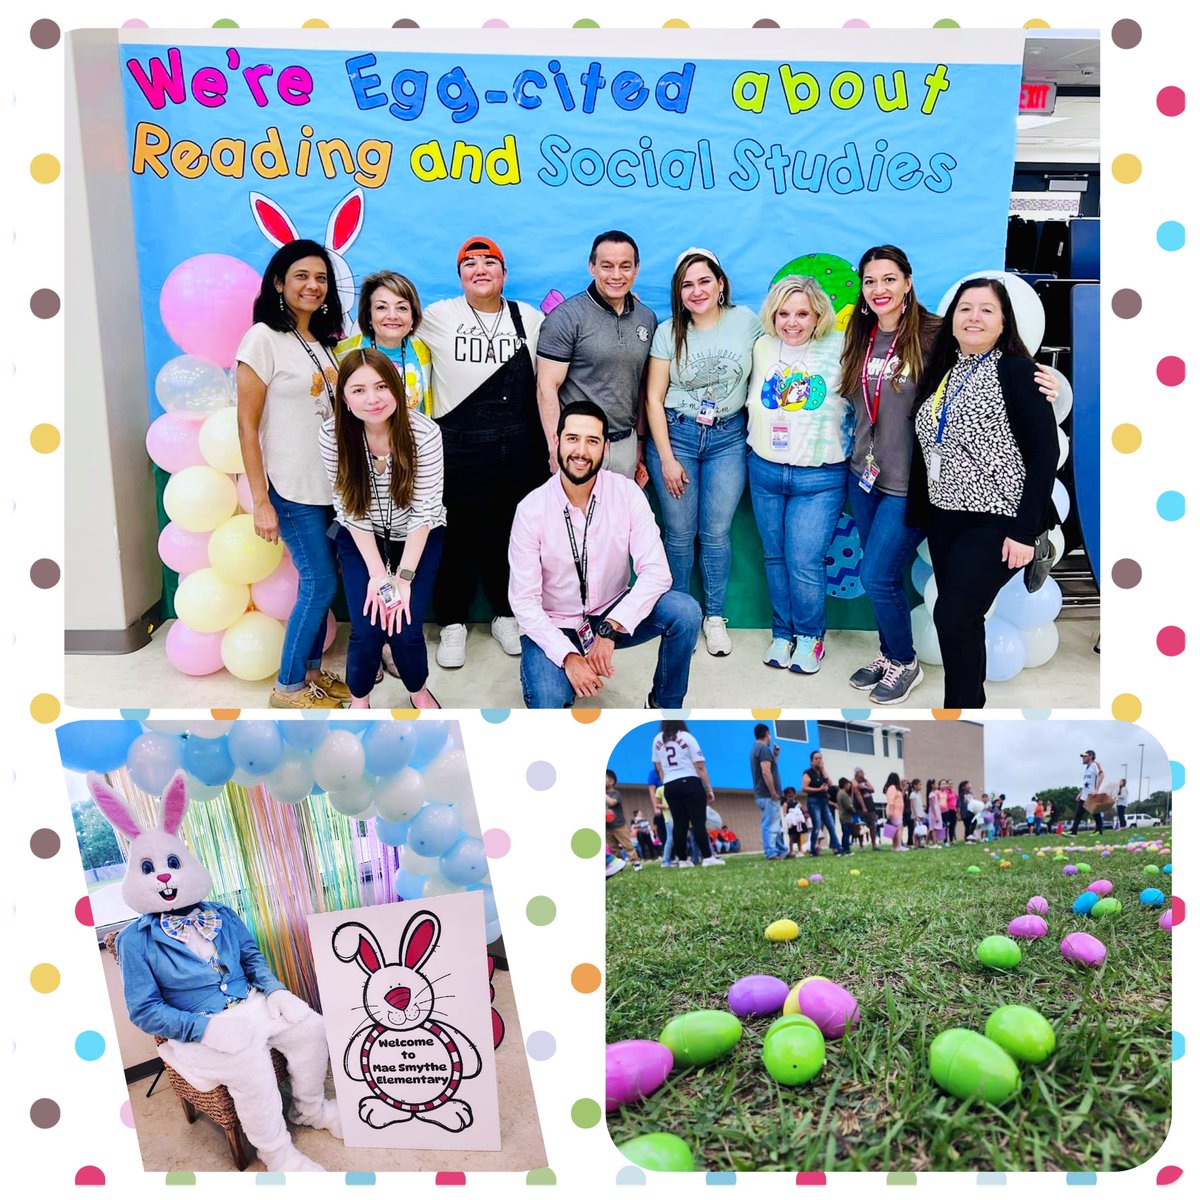 Literacy Night was a success! Families enjoyed activities indoors and outdoors. Love my school family! 📚📕📓📝🌎🗺️
#cross-curricularcollaboration #msemustangs @MaeSmythe #bookfair #readingandwriting #socialstudies #bunnyhopegghunt #easterbunnycameforavisit🐰🥚